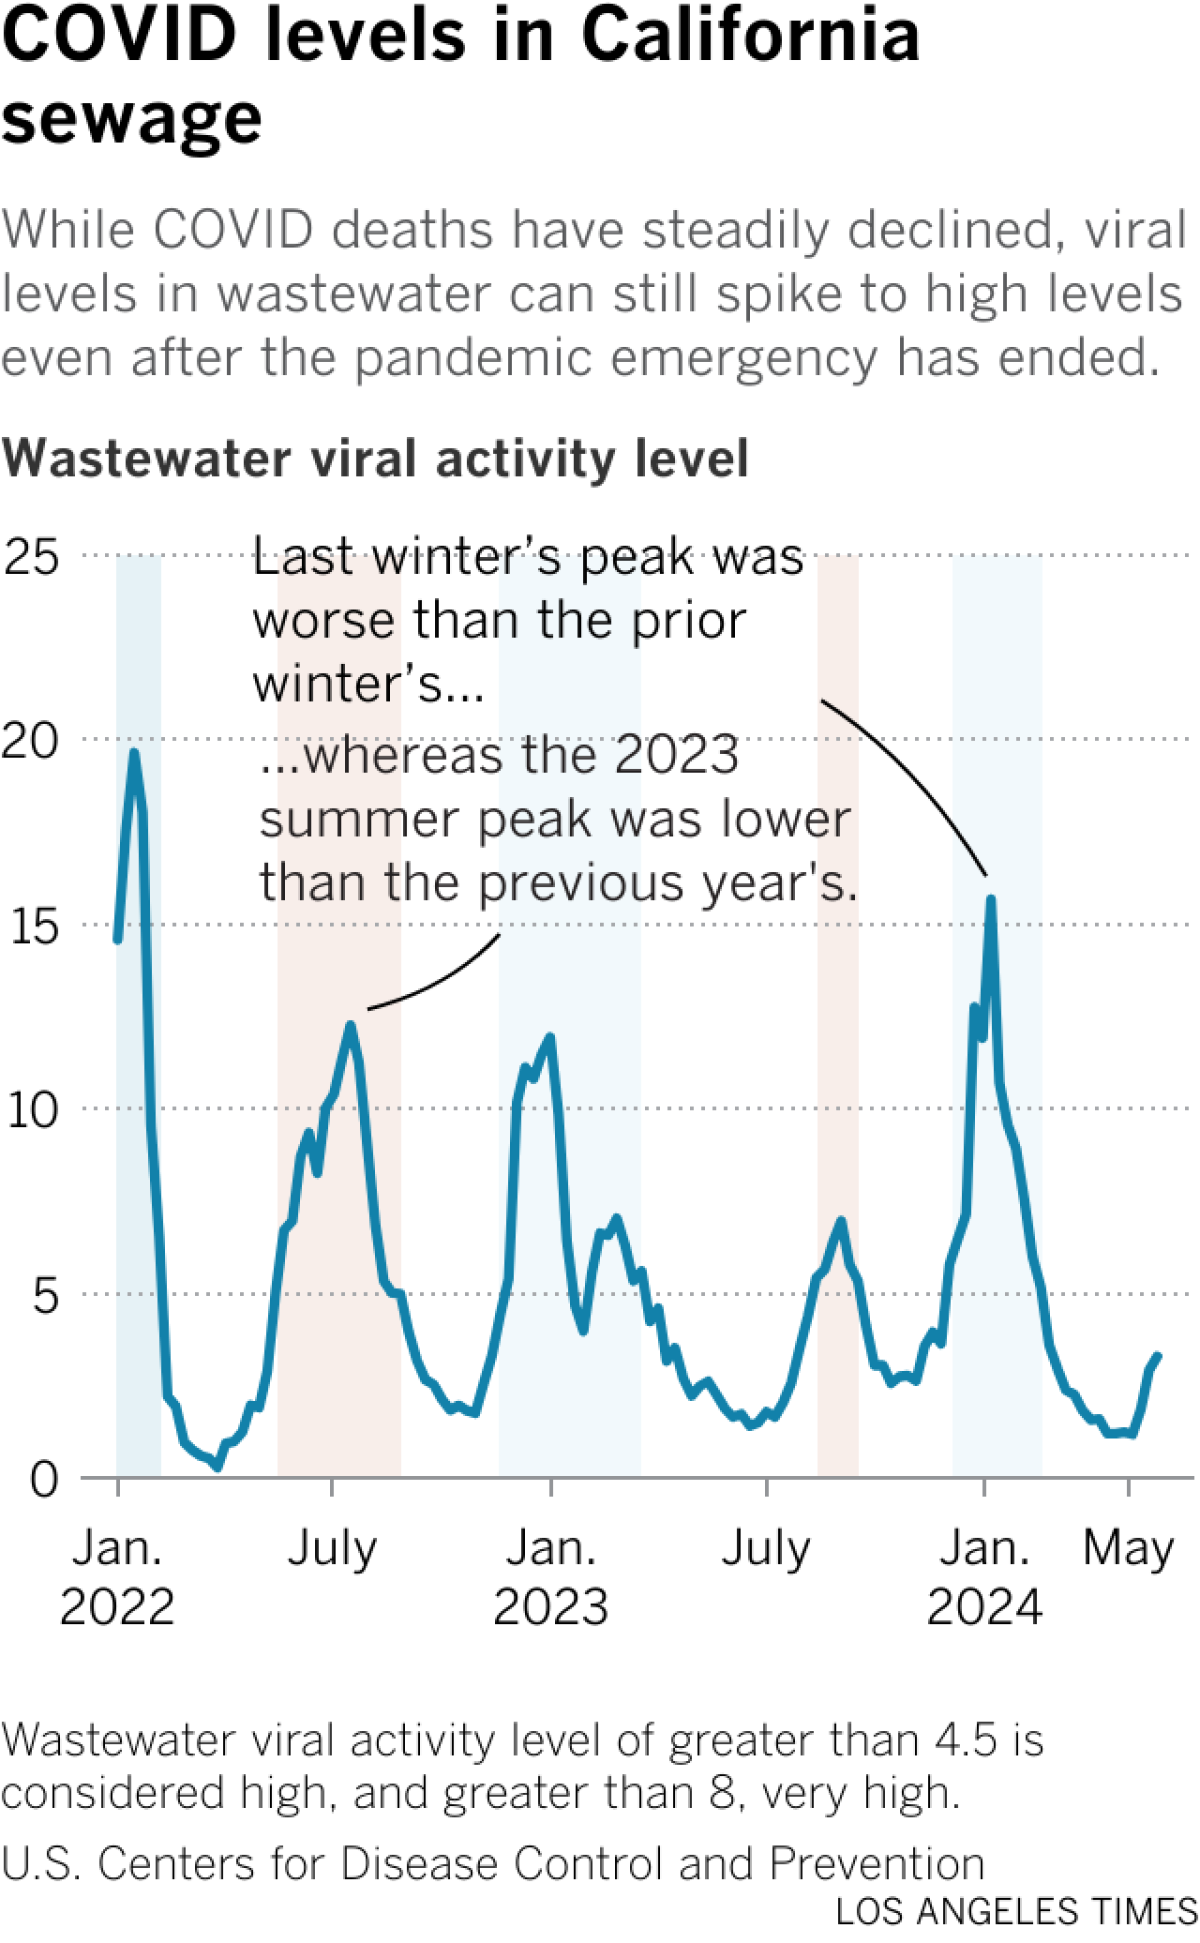 While COVID deaths have steadily decreased, viral levels in wastewater can still reach elevated levels even after the pandemic emergency has ended.